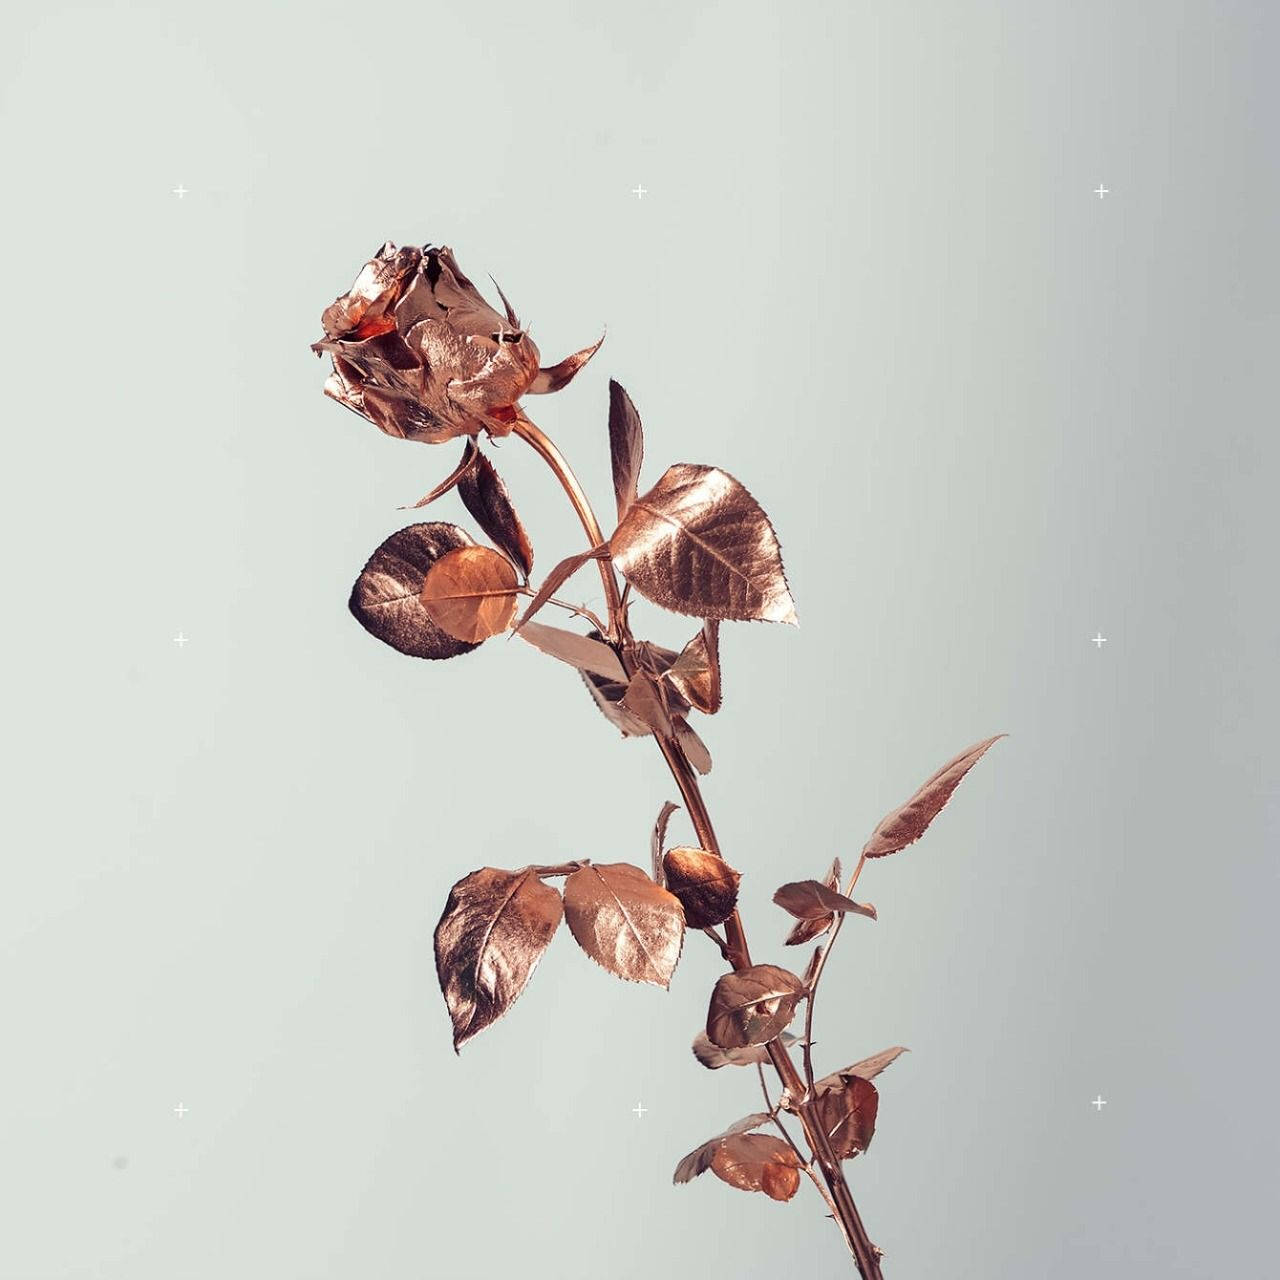 Free Rose Gold Wallpaper Downloads, [300+] Rose Gold Wallpapers for FREE |  